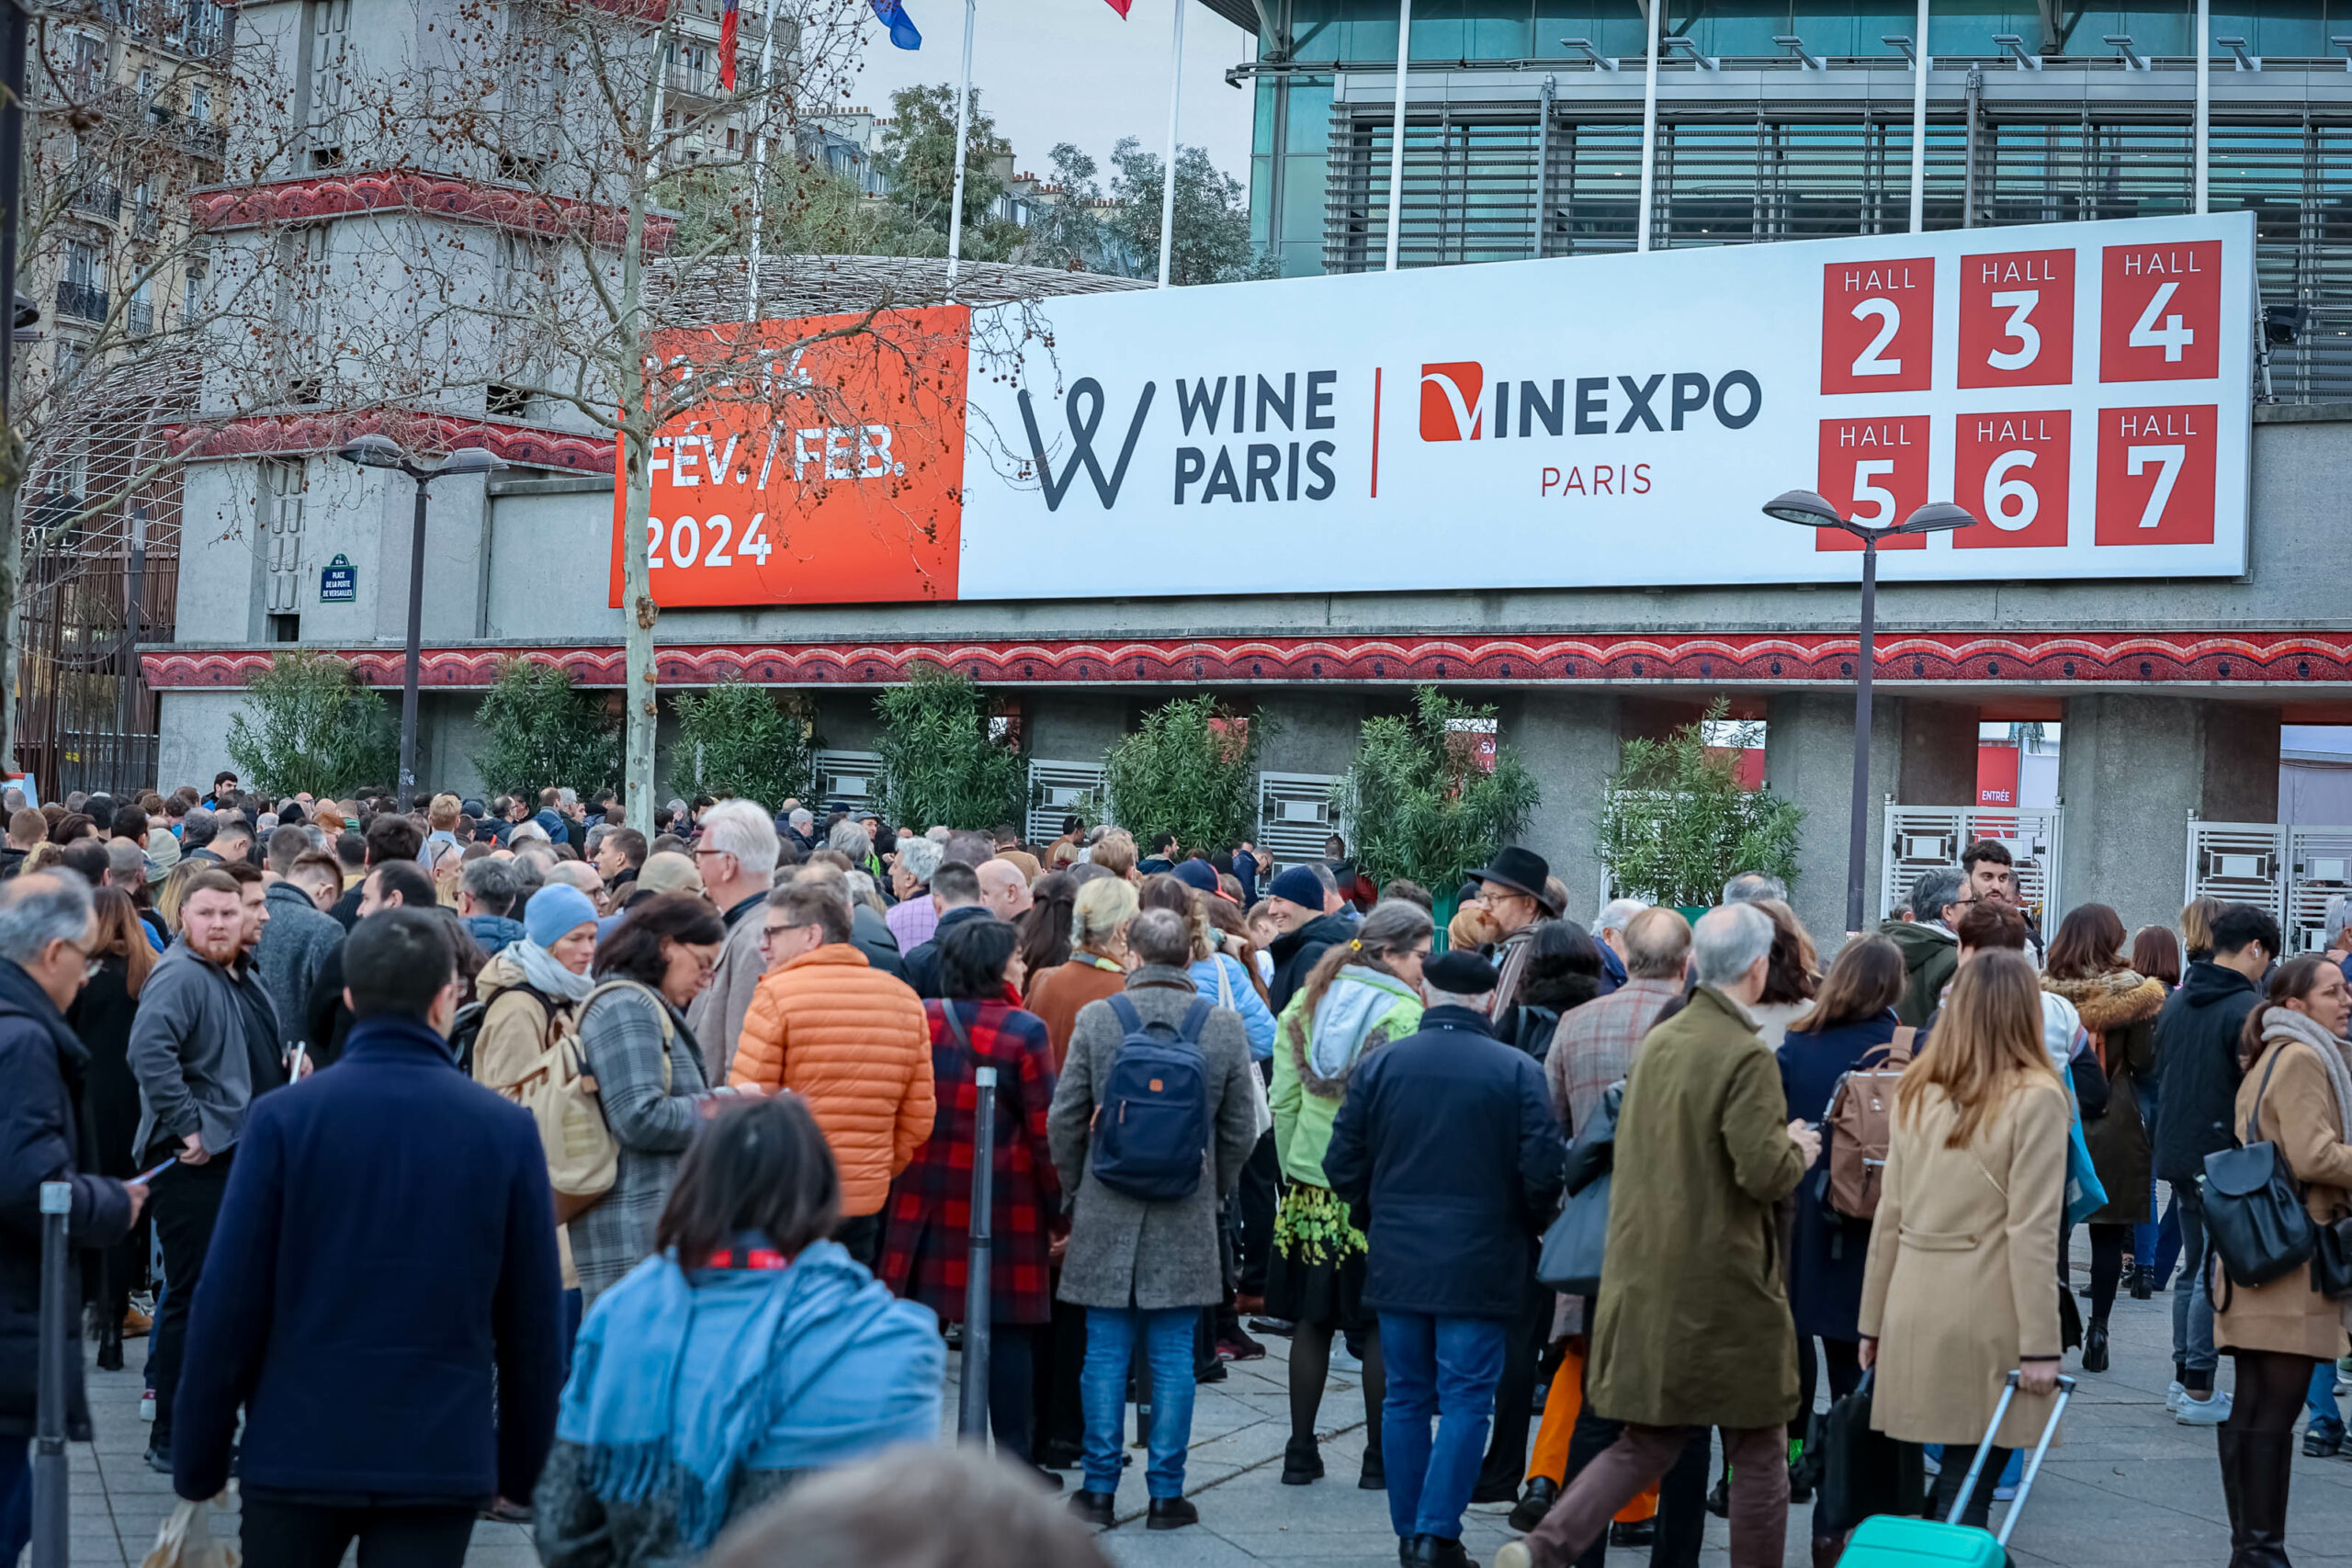 The report on Wine Paris & Vinexpo Paris 2024: the success of the new edition